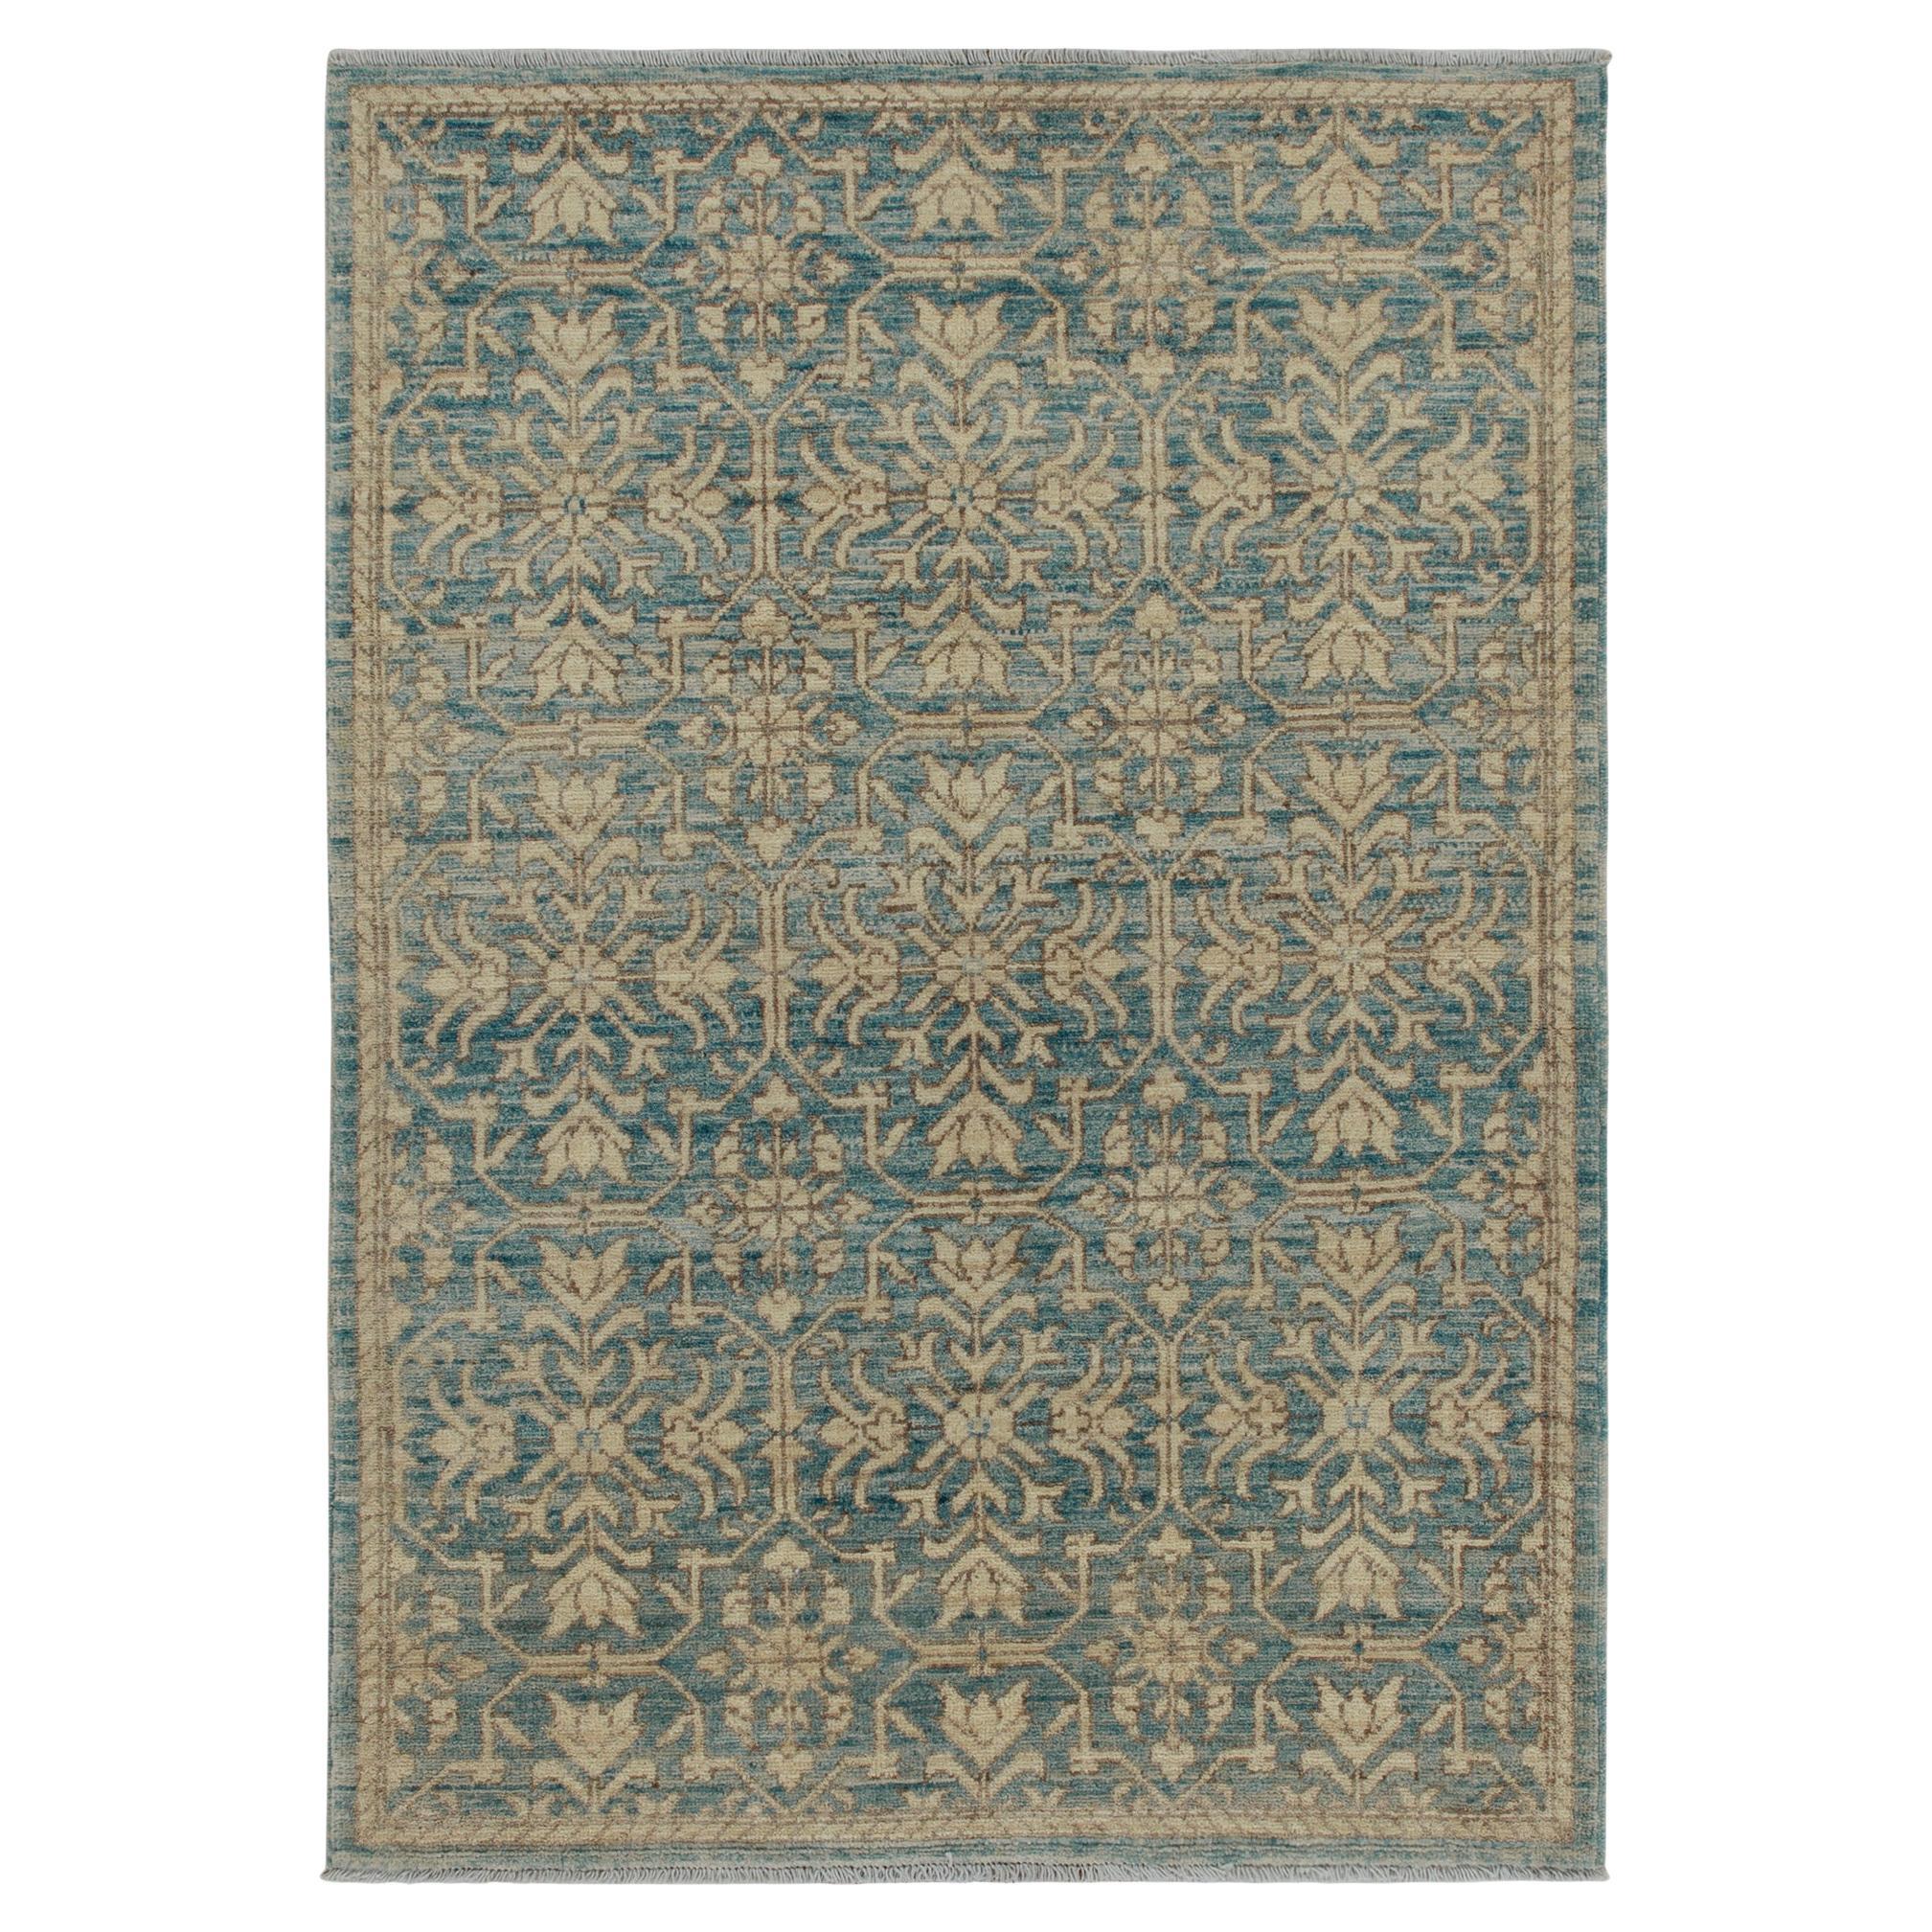 Rug & Kilim’s Contemporary Rug in Blue with Beige-Brown Floral Patterns For Sale